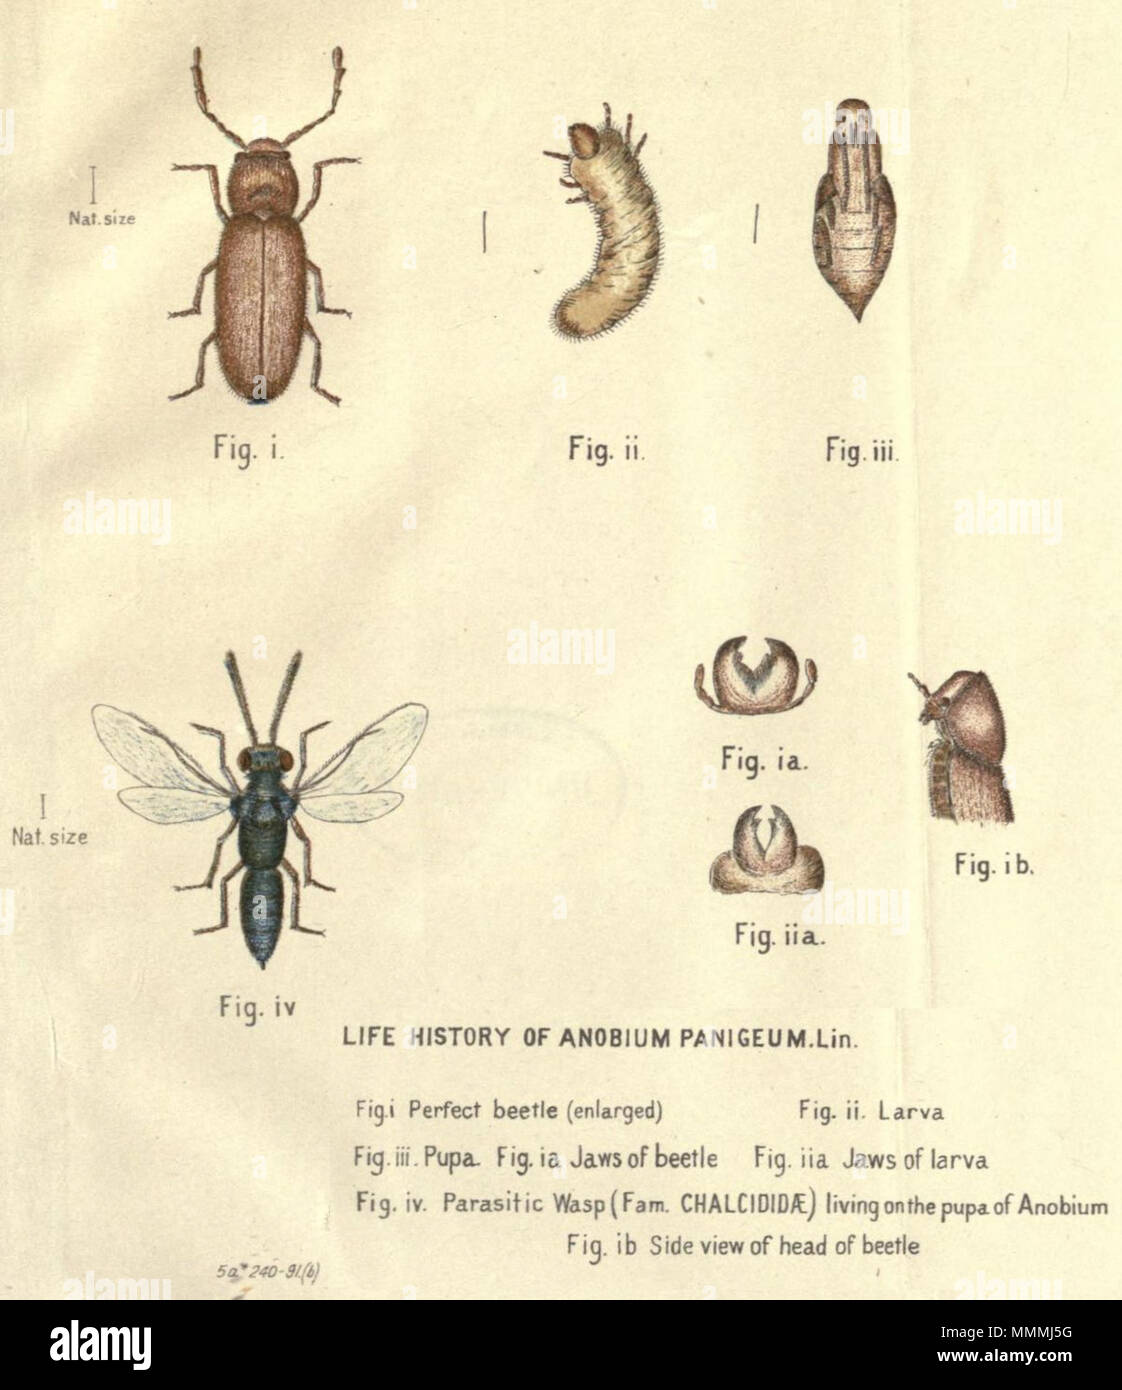 . English: The life history of Stegobium paniceum (syn. Anobium paniceum) (Walter W. Froggatt, Report on a beetle destroying boots & shoes in Sydney, Sydney, Department of Public Instruction, Technological Museum, coll. « Technical Education Series », n° 8, 1891) . 1891. Froggatt, Walter W. Anobium paniceum life history Stock Photo